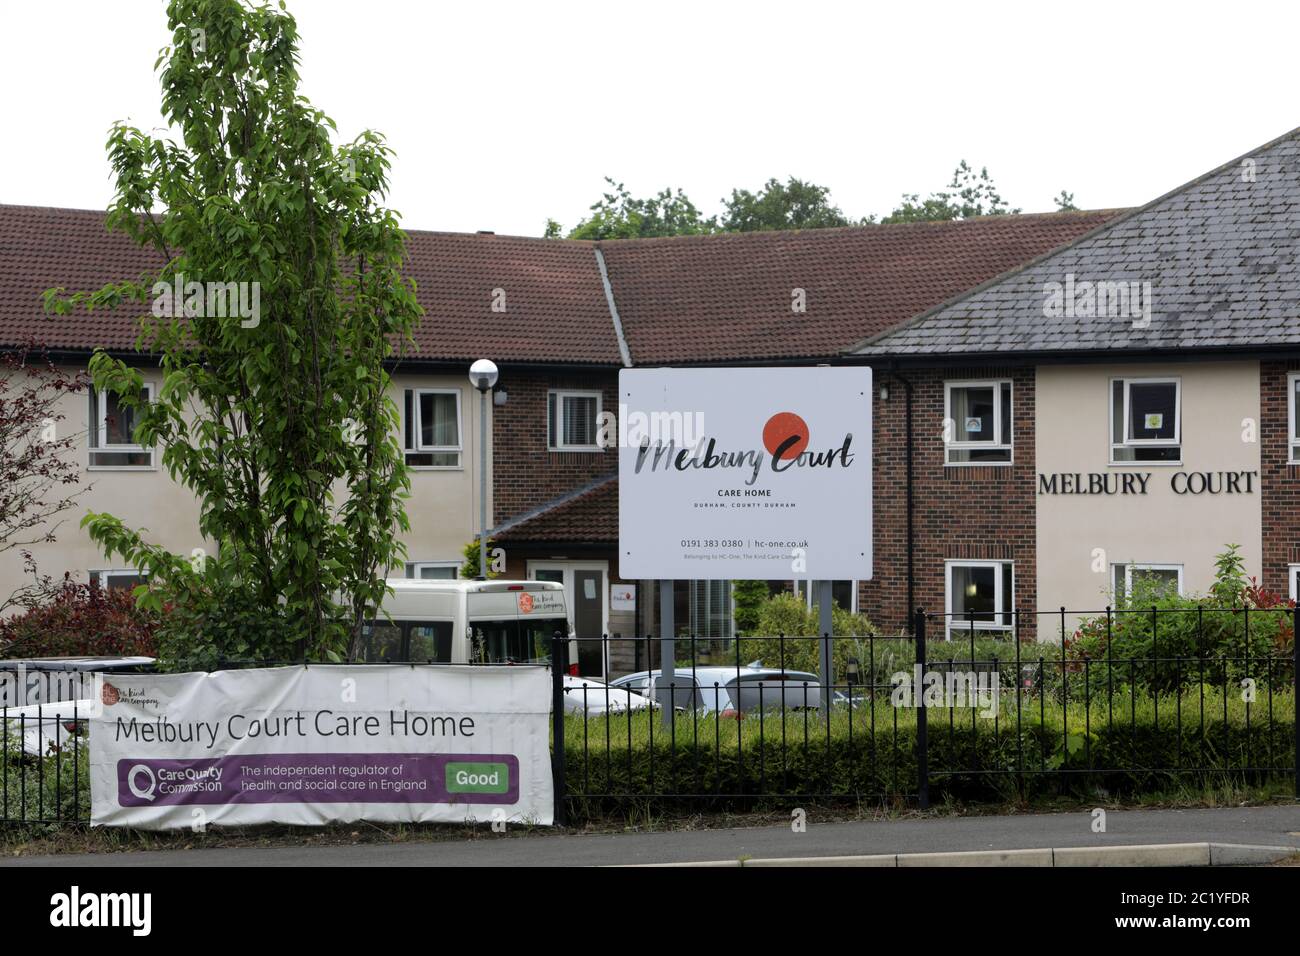 Melbury Court Care Home which has recorded the highest number of covid19 deaths of residents (26) in the UK, Durham, UK. Stock Photo